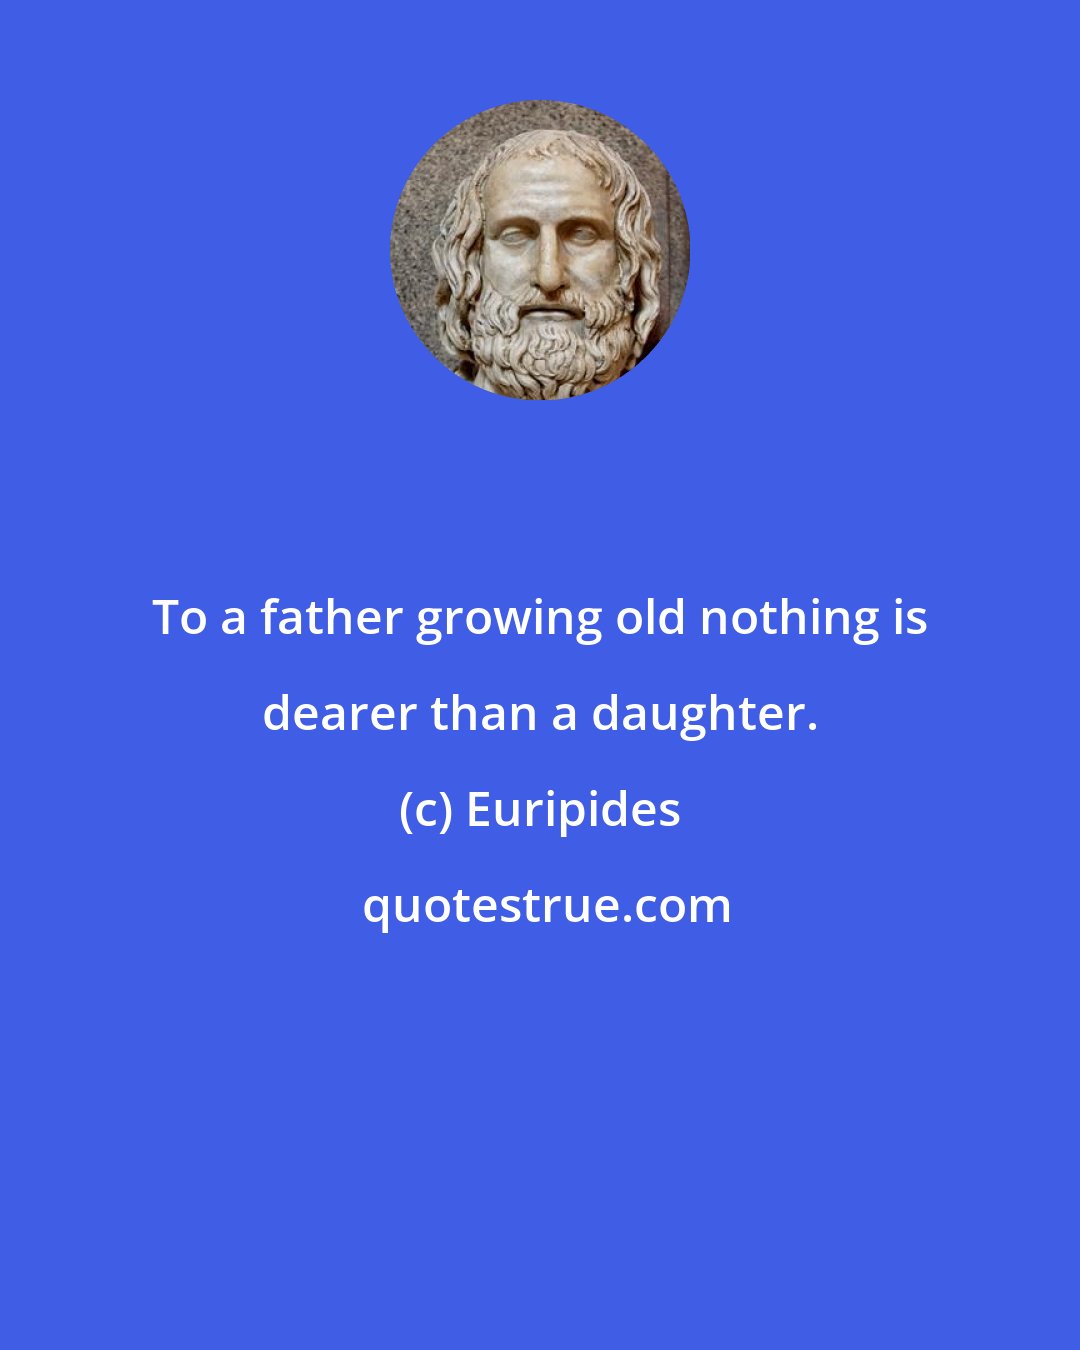 Euripides: To a father growing old nothing is dearer than a daughter.